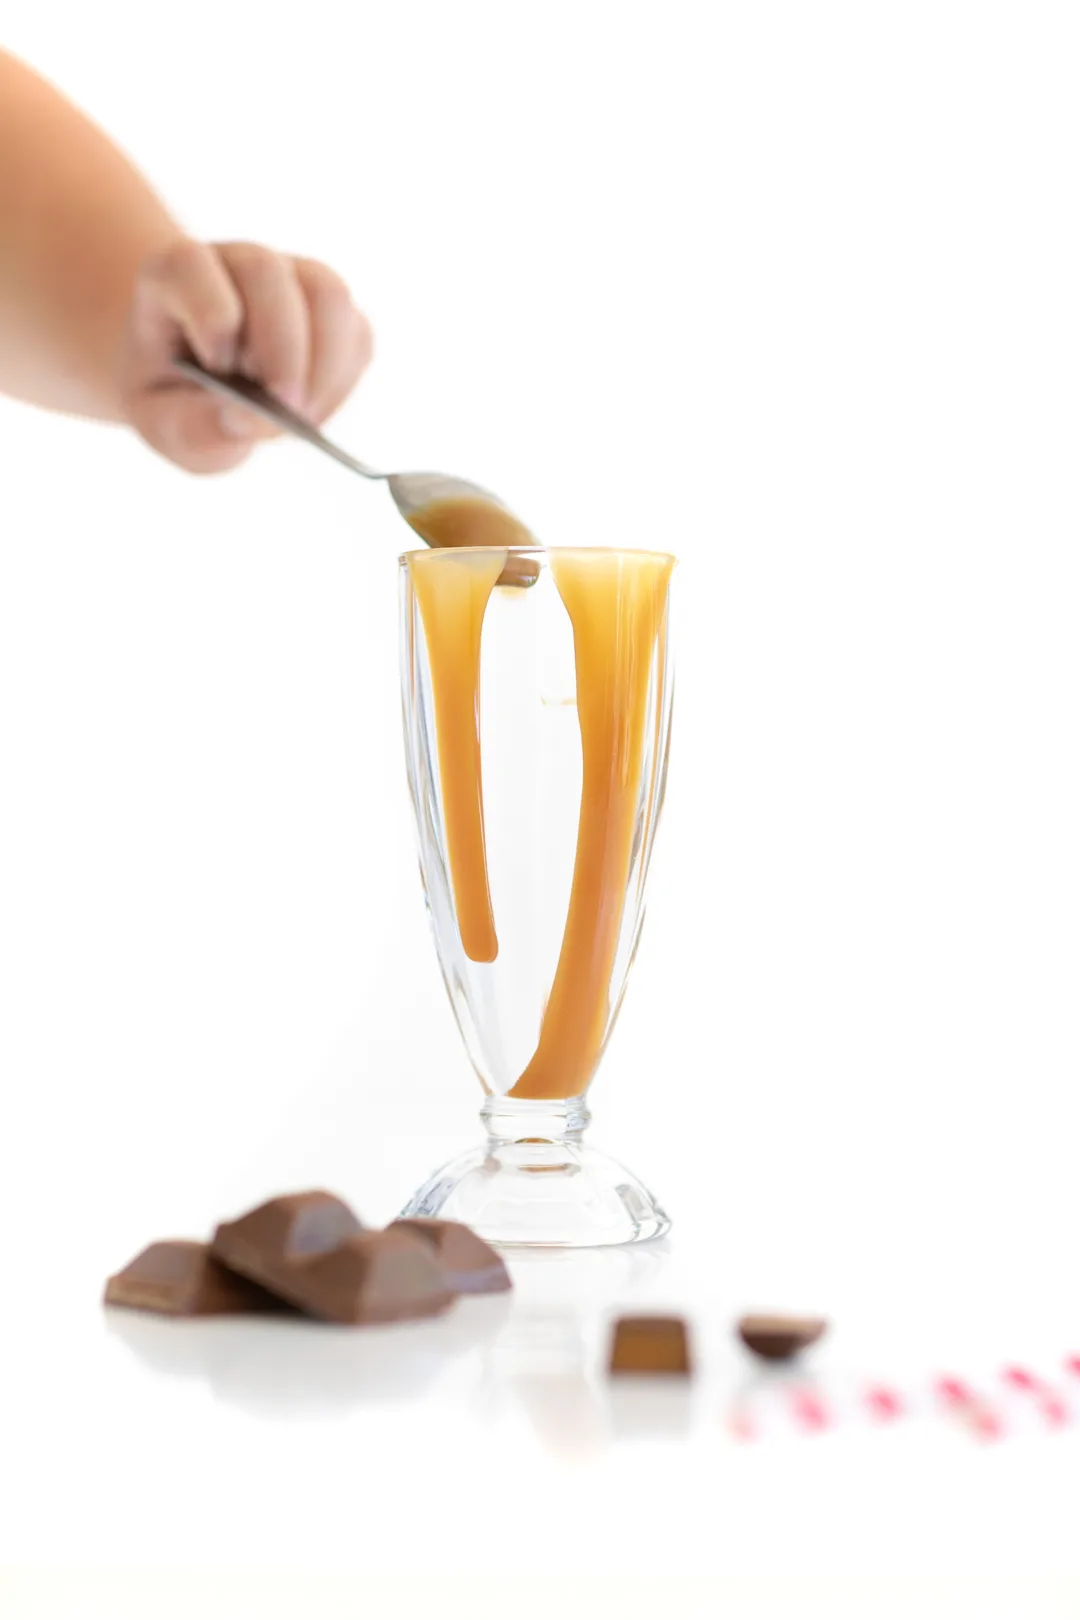 adding caramel to a glass to decorate